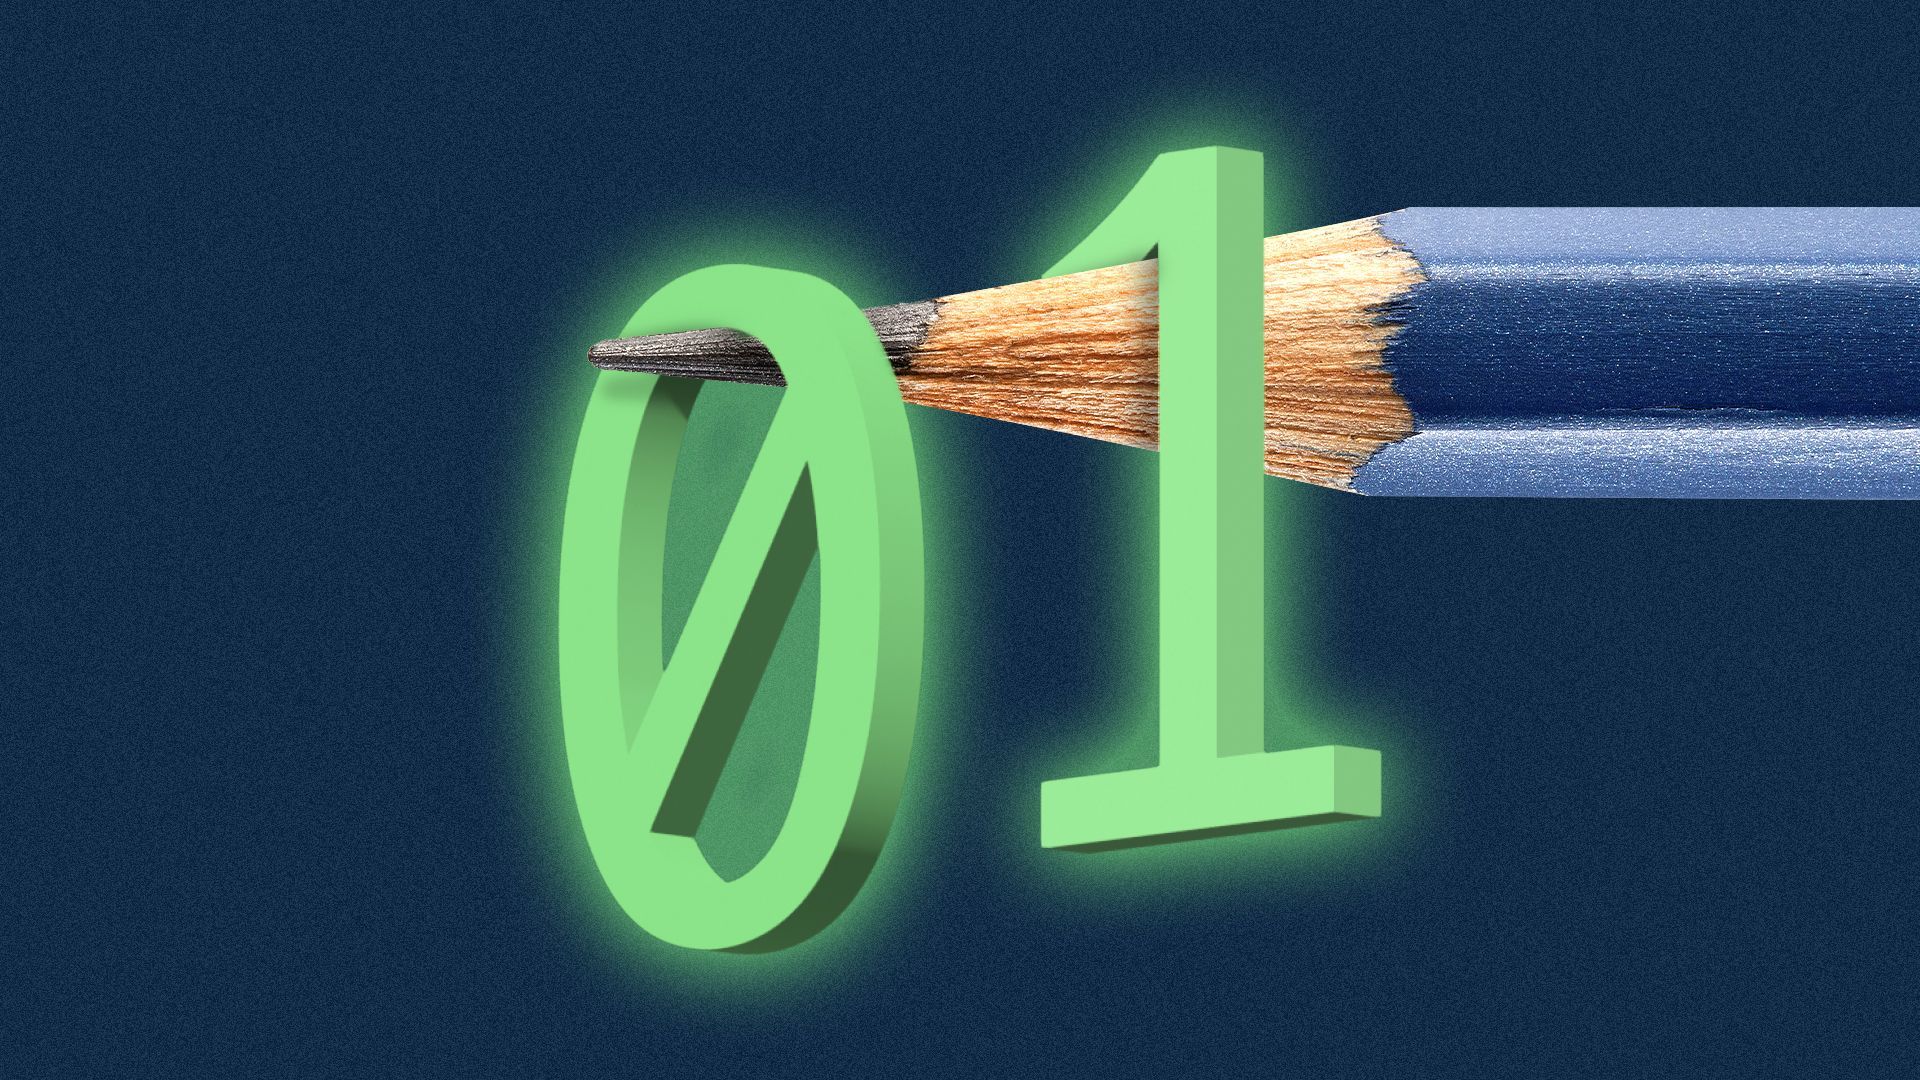 Illustration of a zero and a one balancing on the tip of a pencil